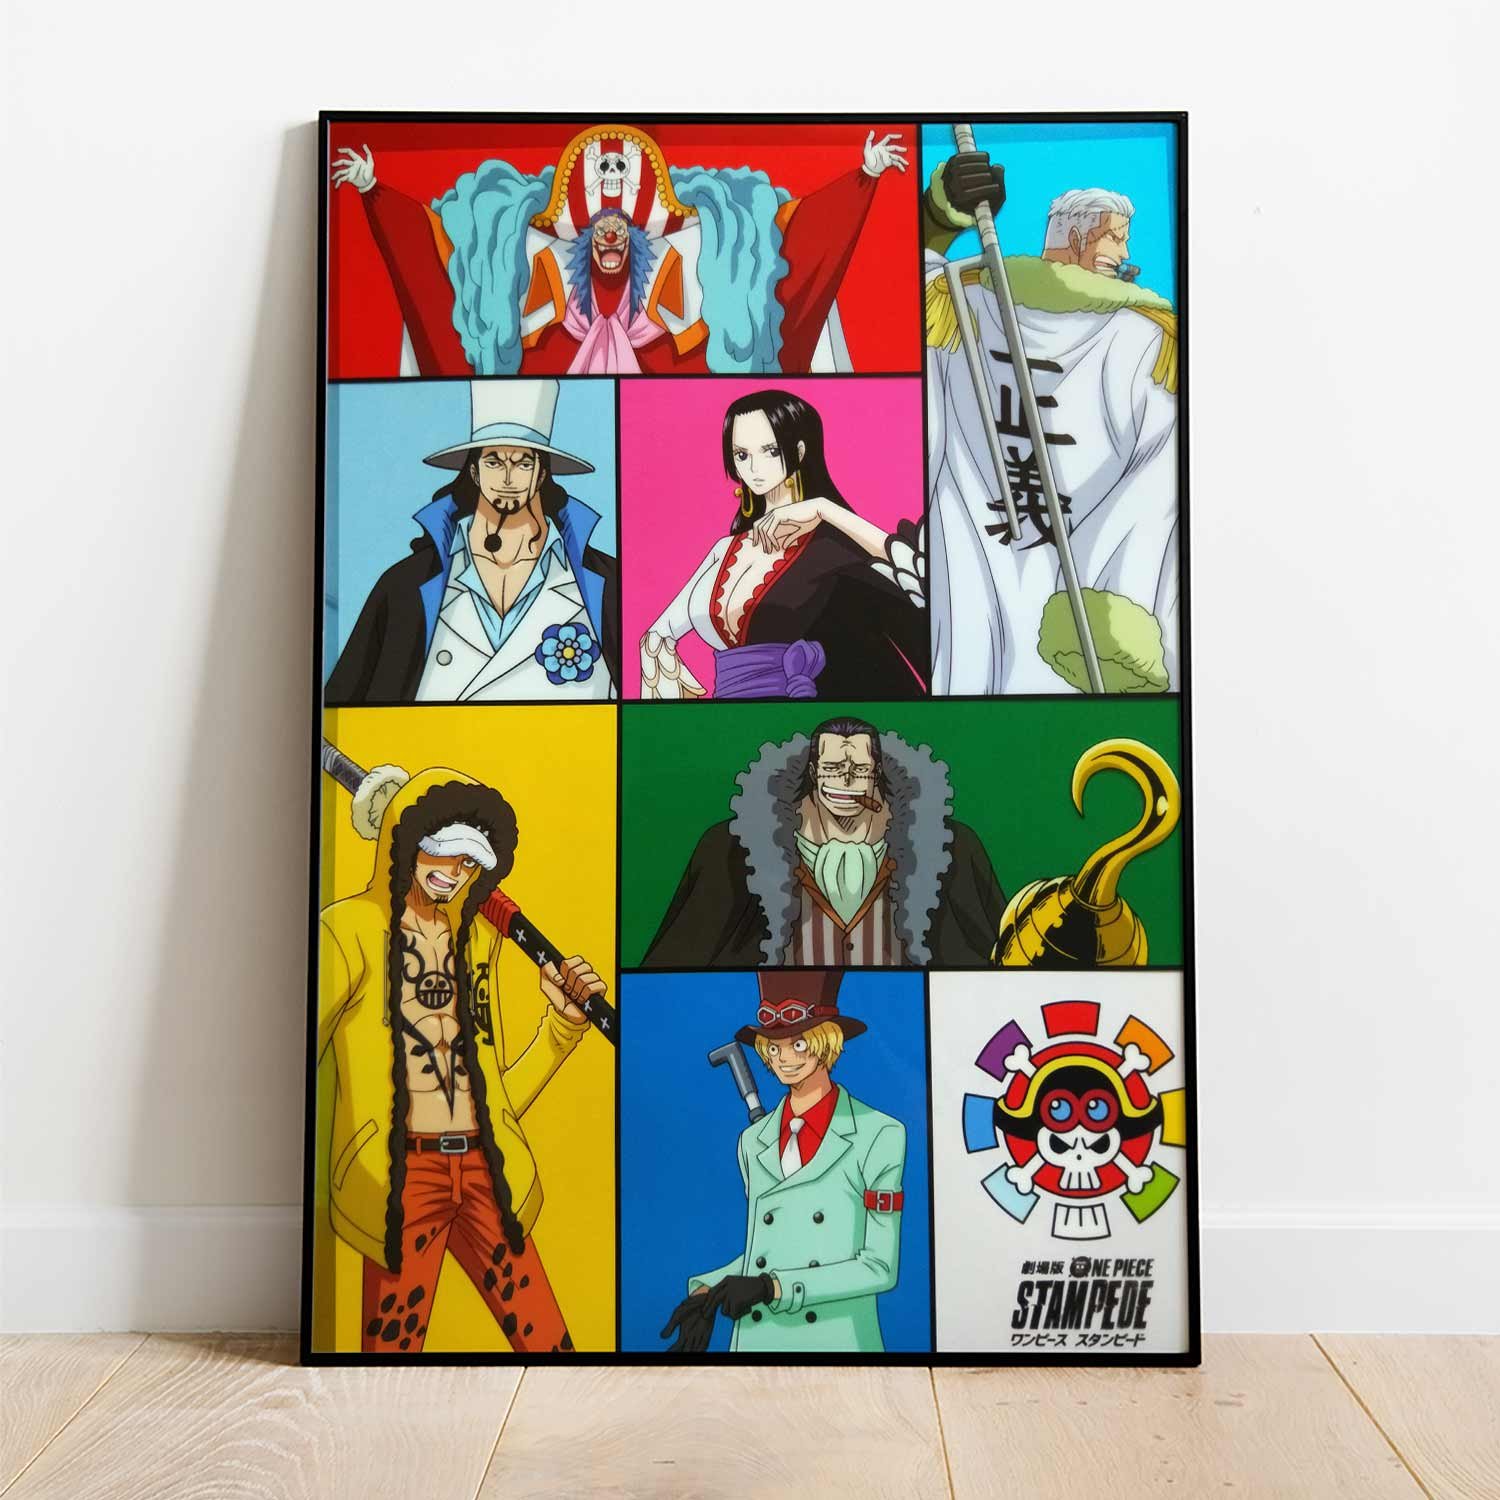 One piece Stampede' Poster by OnePieceTreasure, Displate